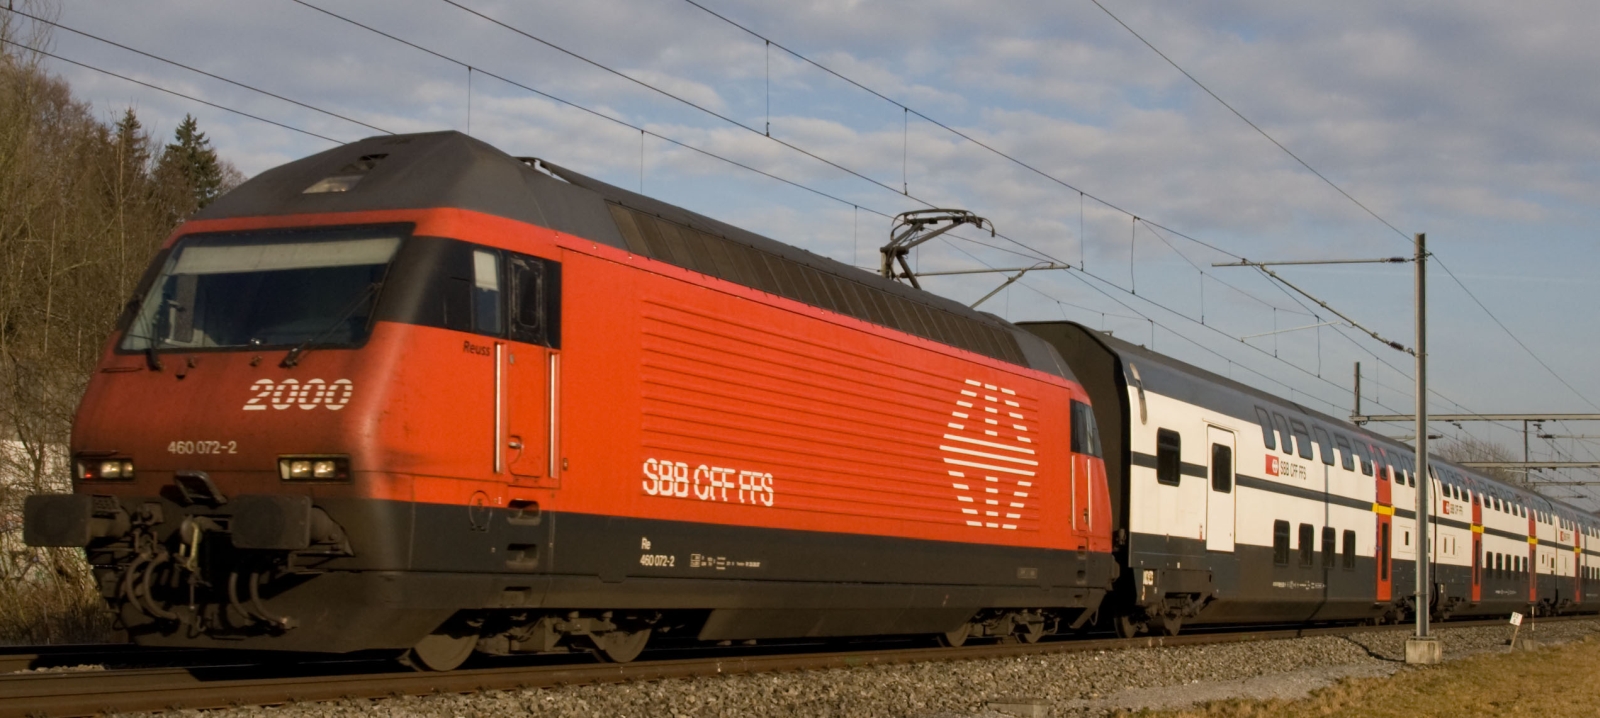 Re 460 072 with an IC2000 double-deck train in February 2008 shortly after leaving Winterthur